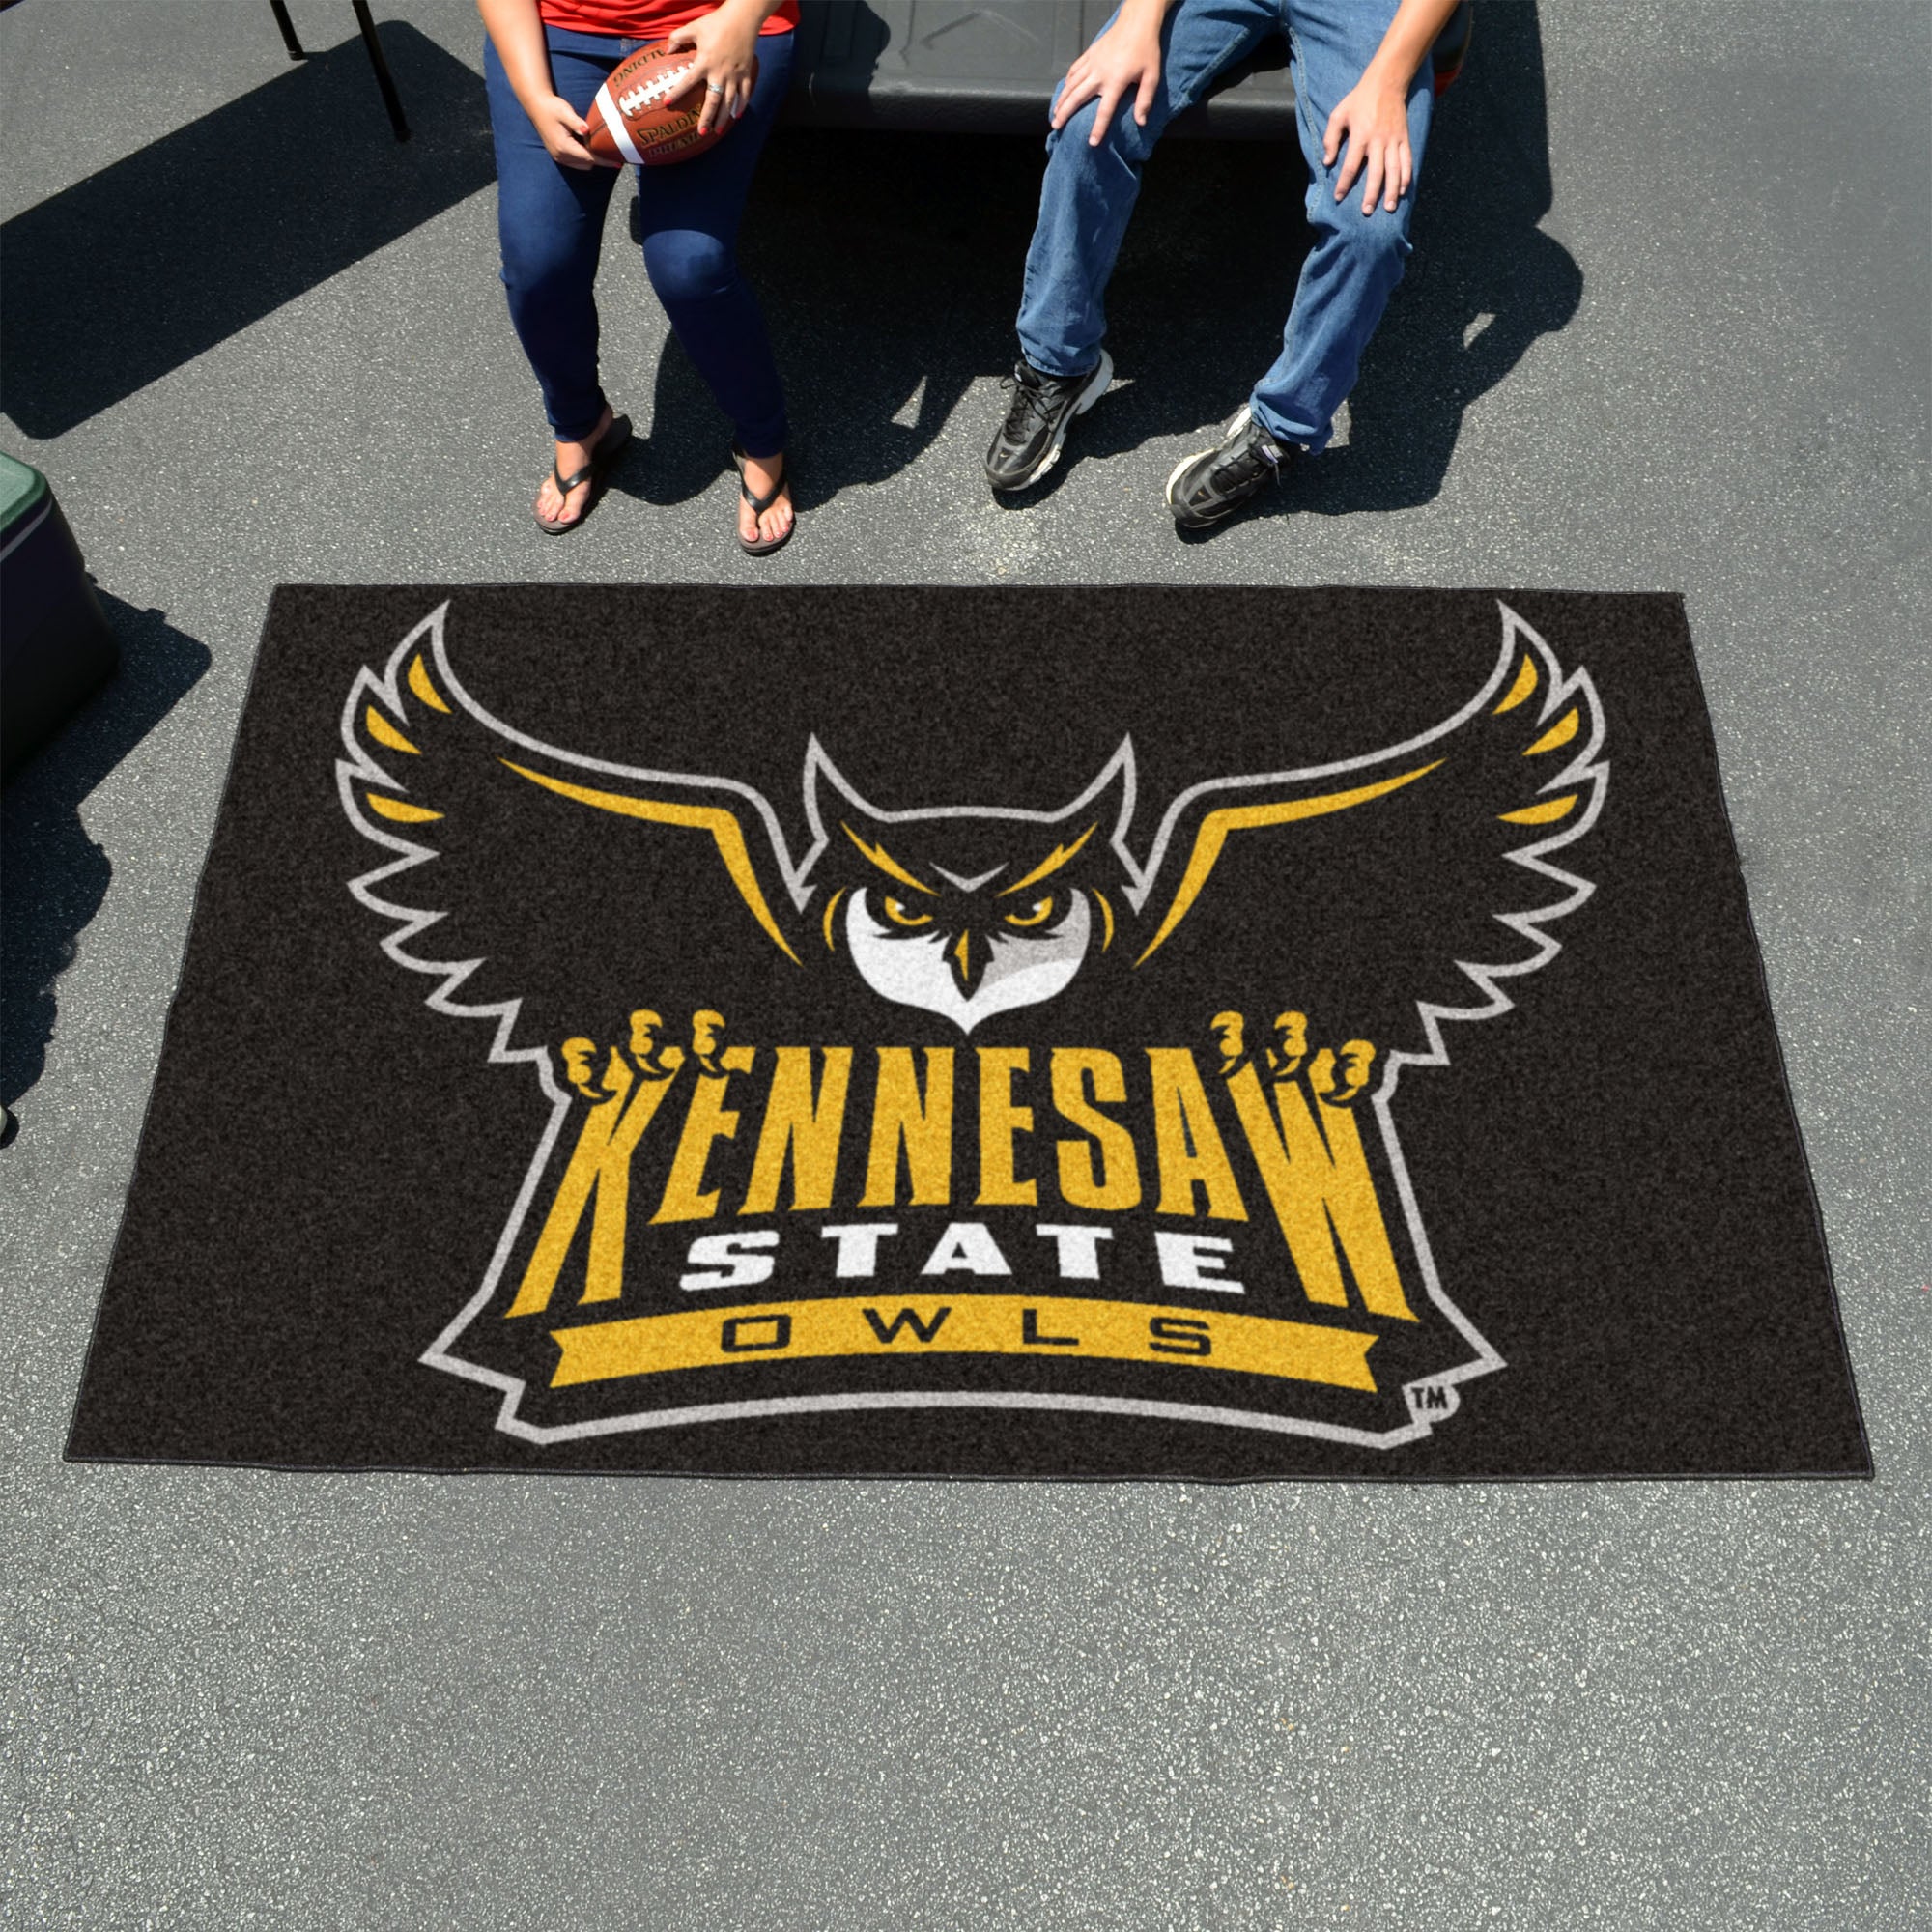 FANMATS, Kennesaw State University Owls Rug - 5ft. x 8ft.